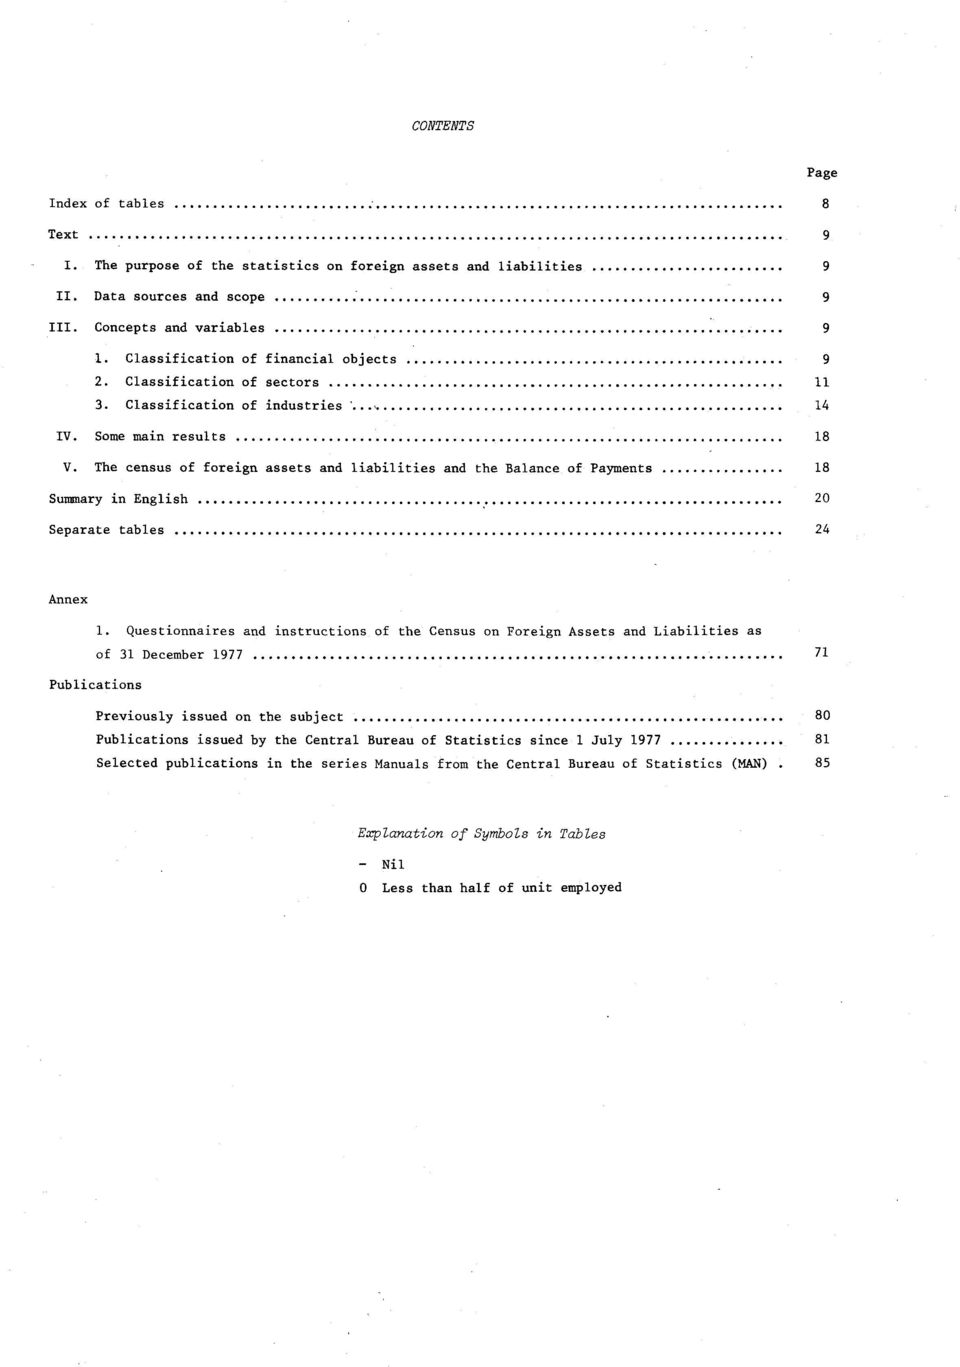 Separate tables 24 Annex 1 Questionnaires and instructions of the Census on Foreign Assets and Liabilities as of 31 December 1977 71 Publications Previously issued on the subject 8 Publications